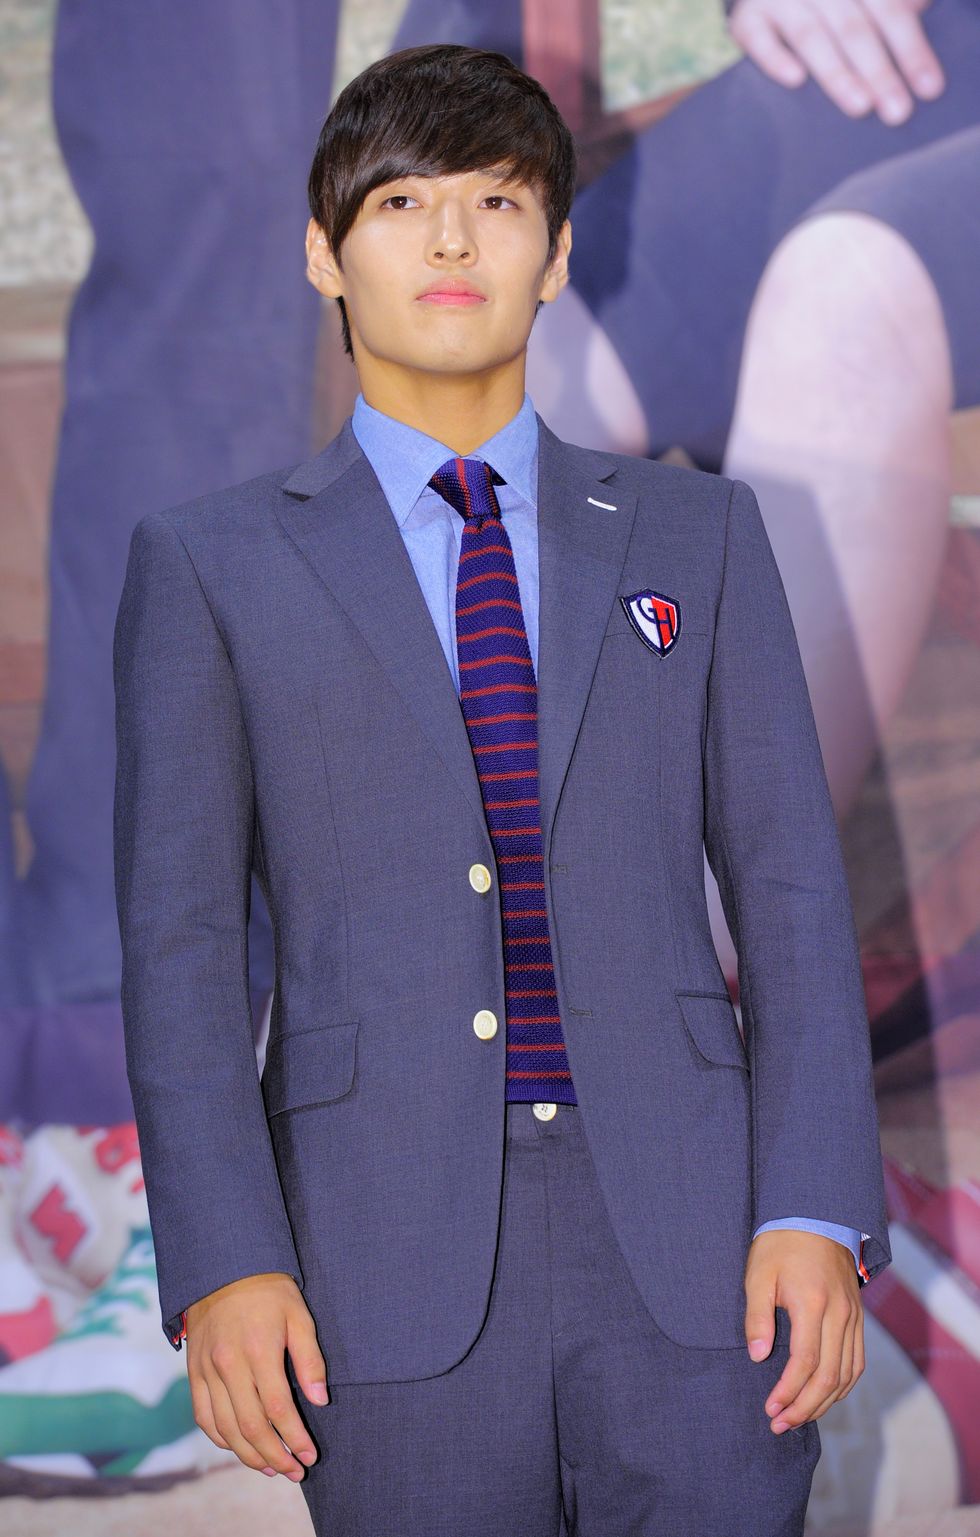 seoul, south korea   august 13  kang ha neul attends sbs drama to the beautiful you press conference at imperial palace hotel august 13, 2012 in seoul, south korea  photo by the chosunilbo jnsmulti bits via getty images